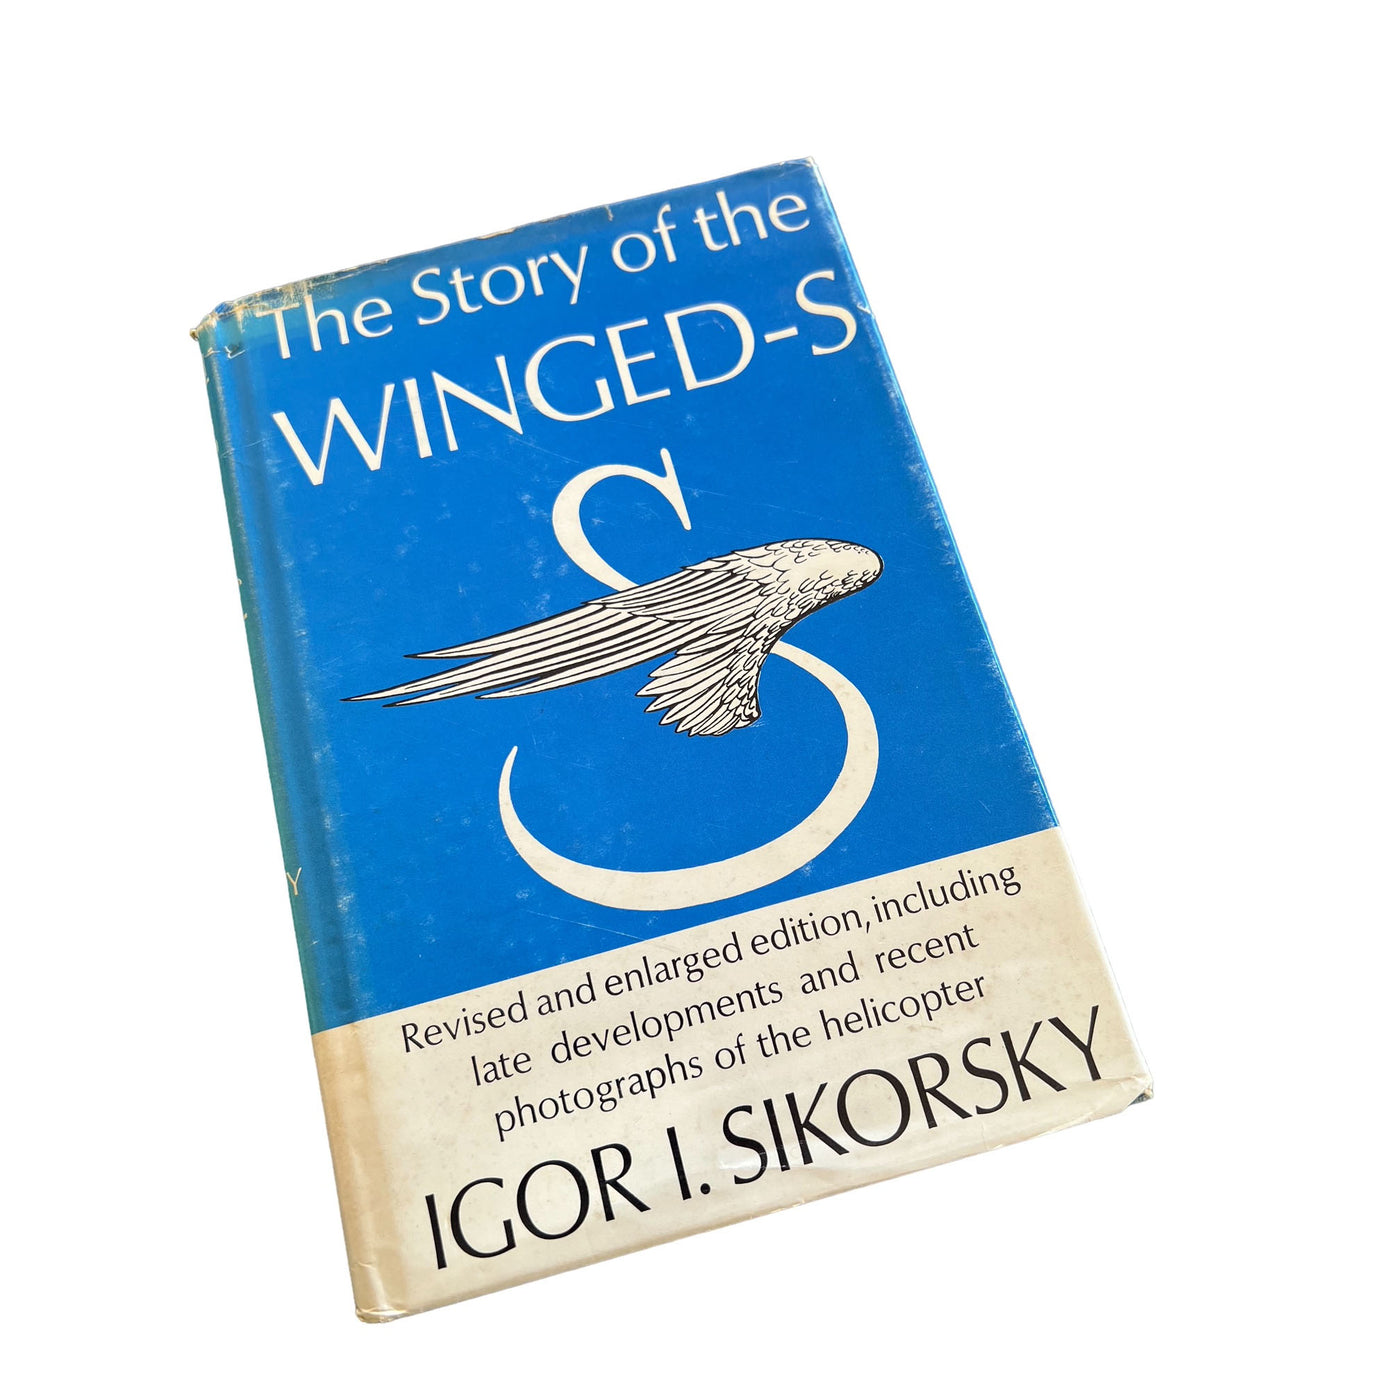 Igor Sikorsky "The Story of the Winged-S" - signed edition